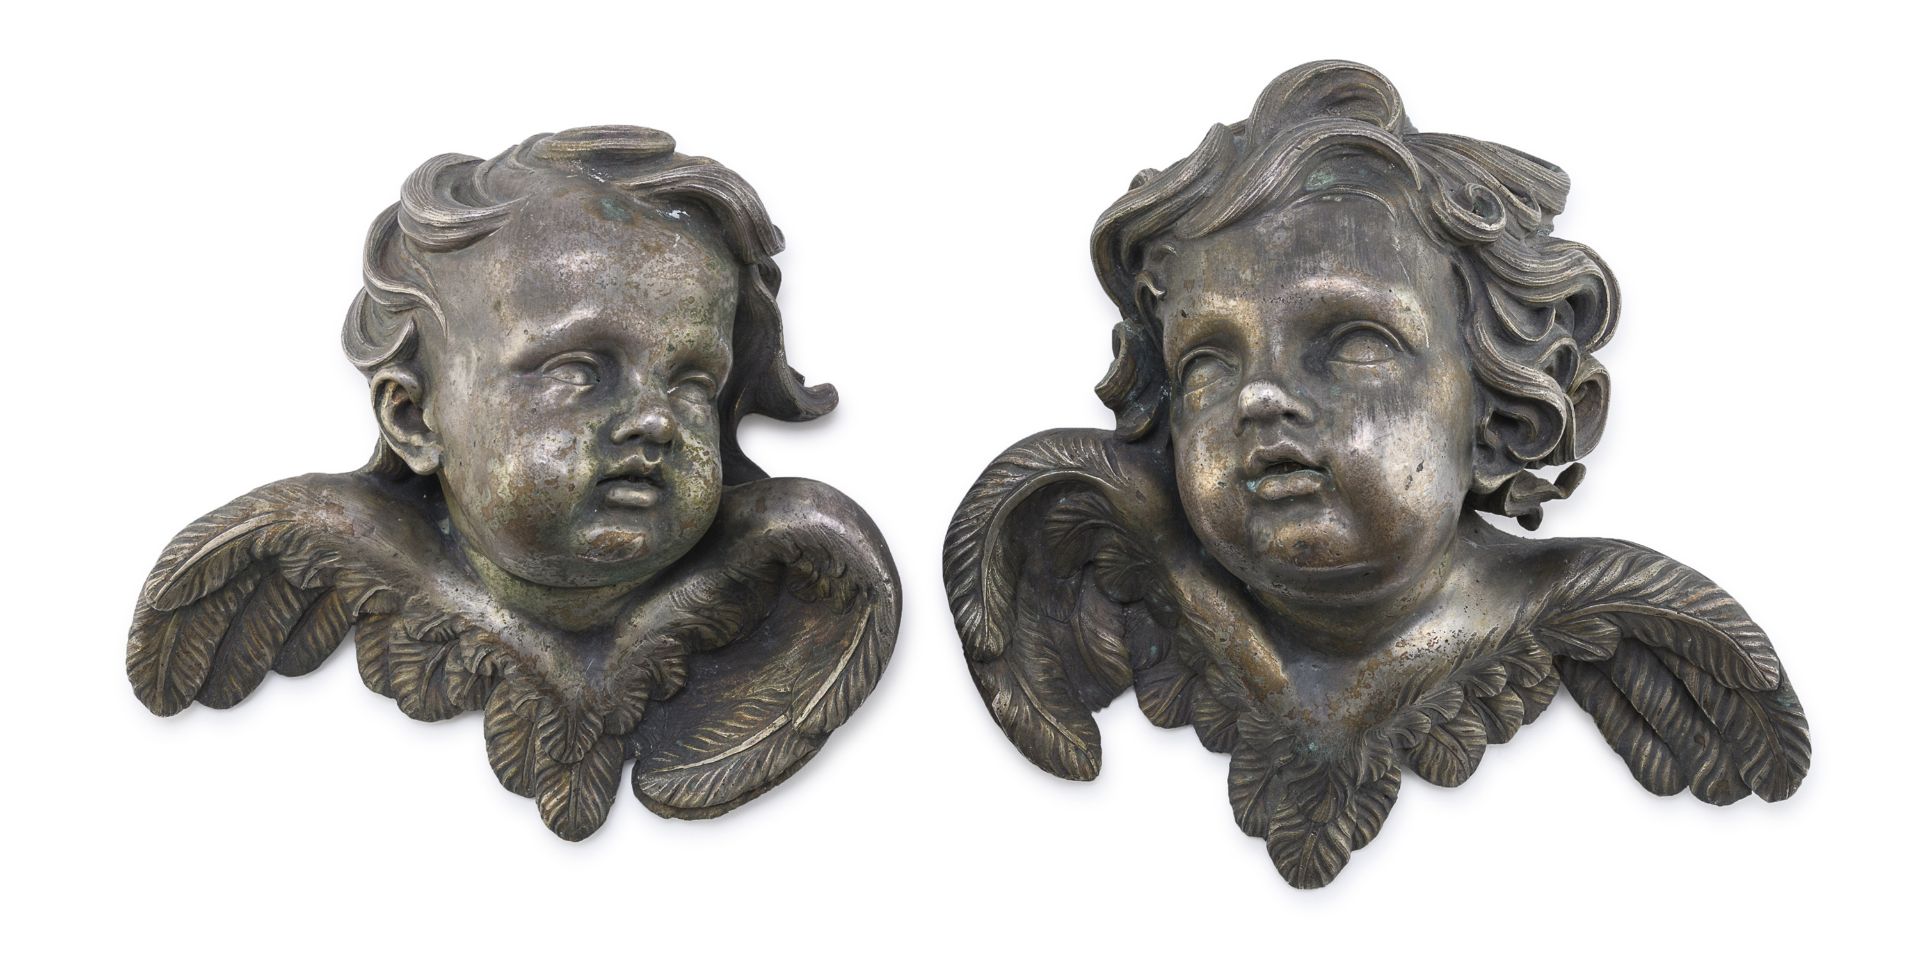 RARE PAIR OF SILVERED BRONZE SCULPTURES ROME LATE 17TH CENTURY